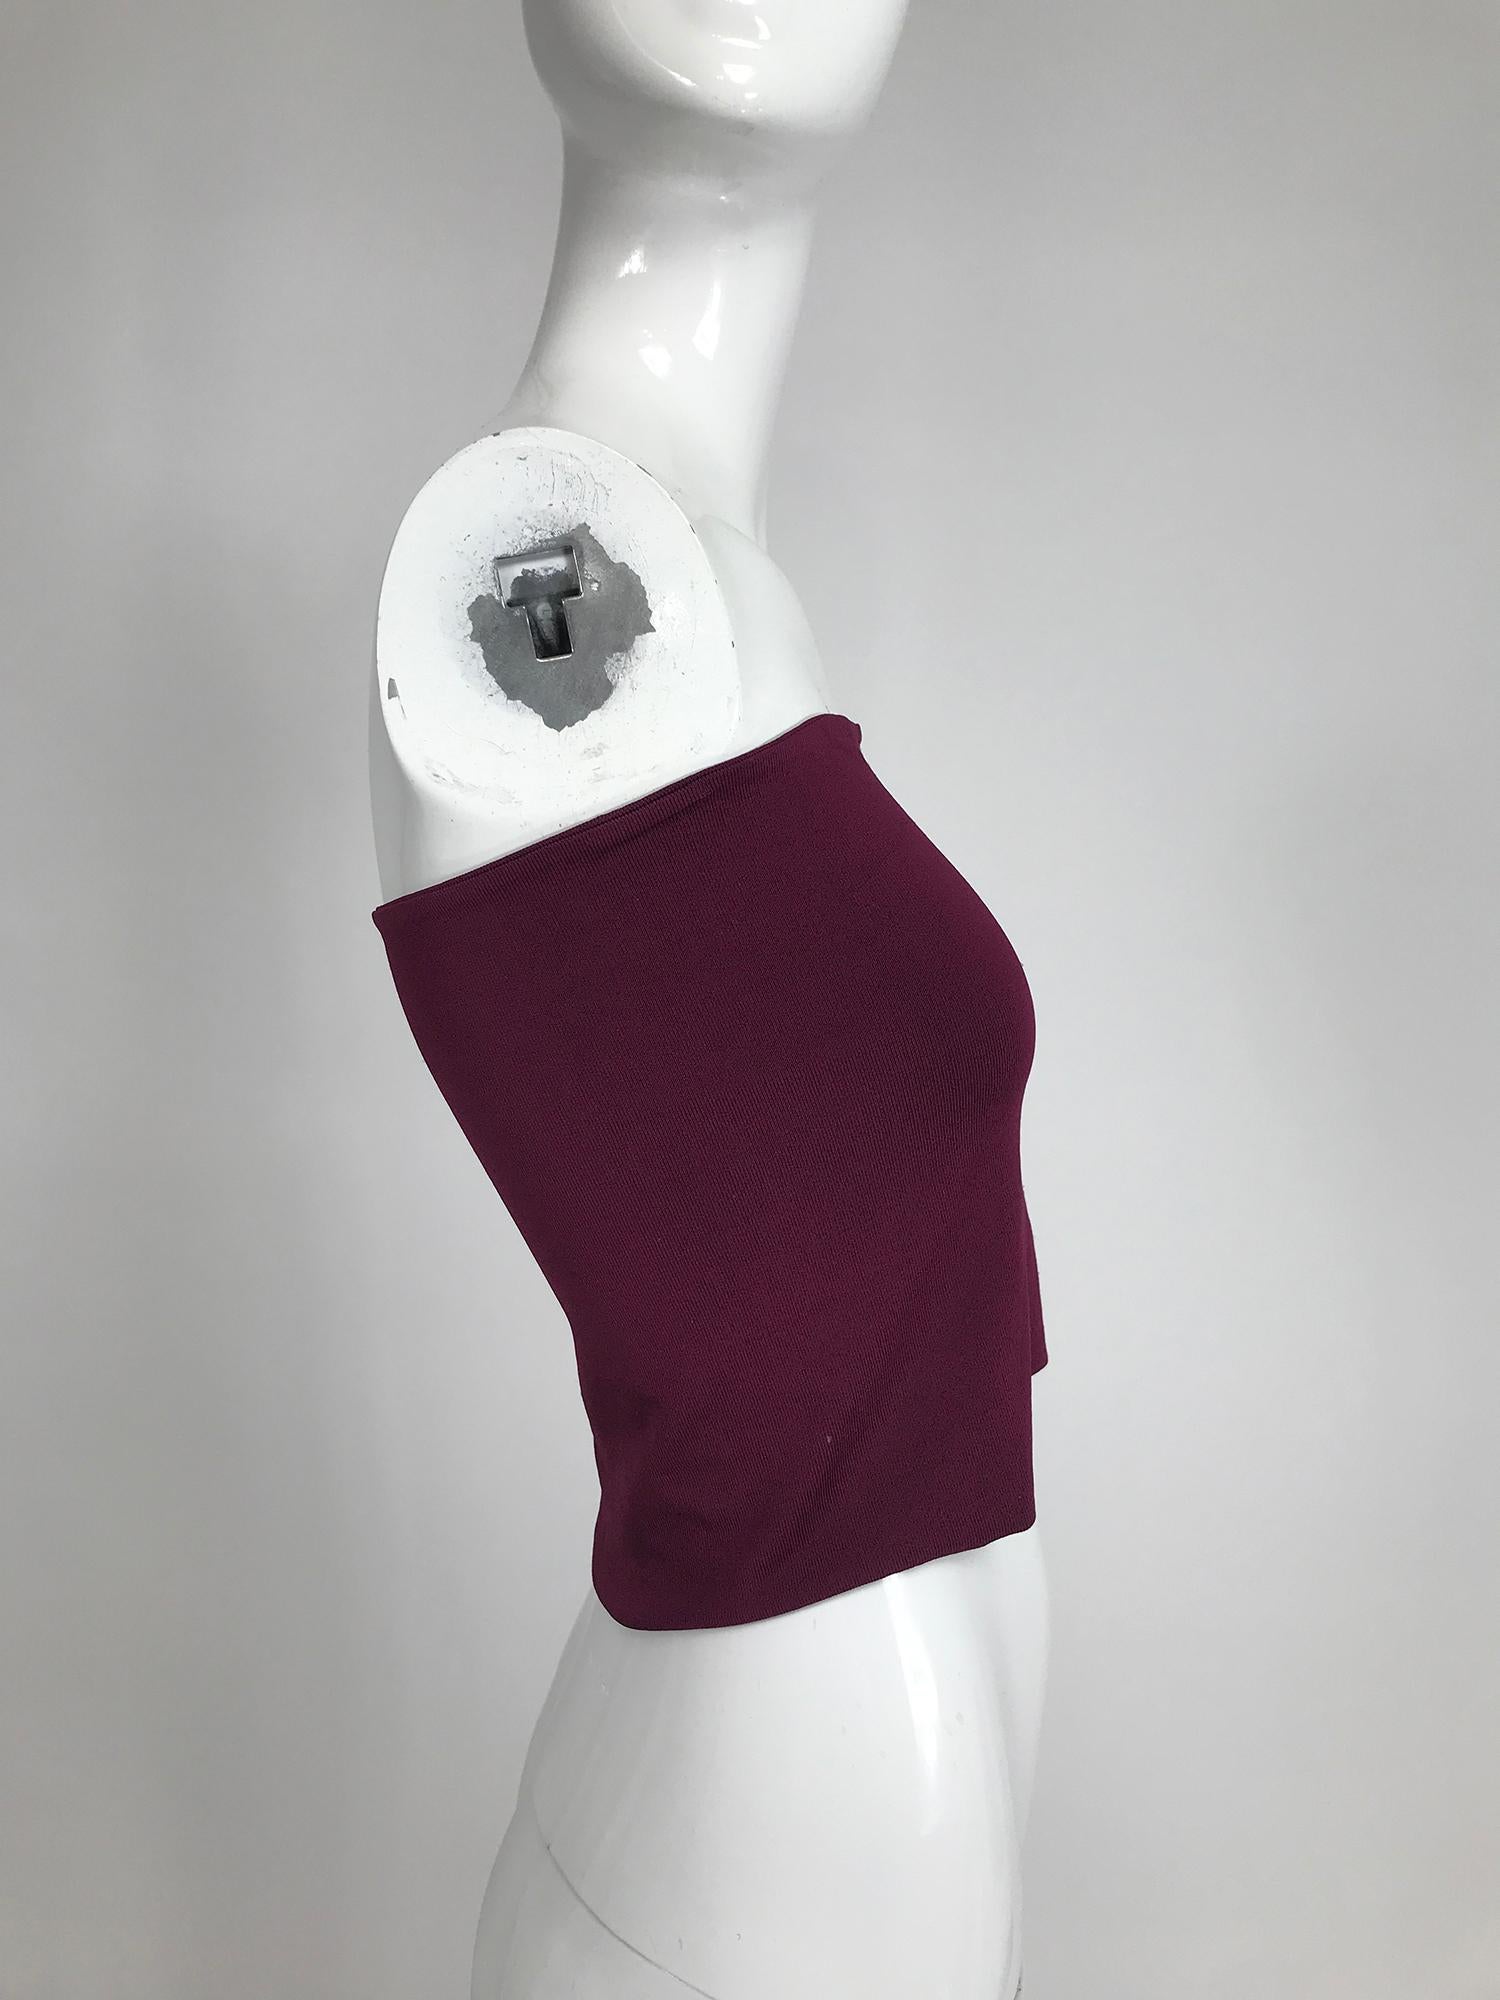  
Ferragamo silky burgundy knit stretch bandeau top Large. Silky stretch rayon/spandex knit pull on top in taupe. 

     In excellent wearable condition.  All our clothing is dry cleaned and inspected for condition and is ready to wear. Any